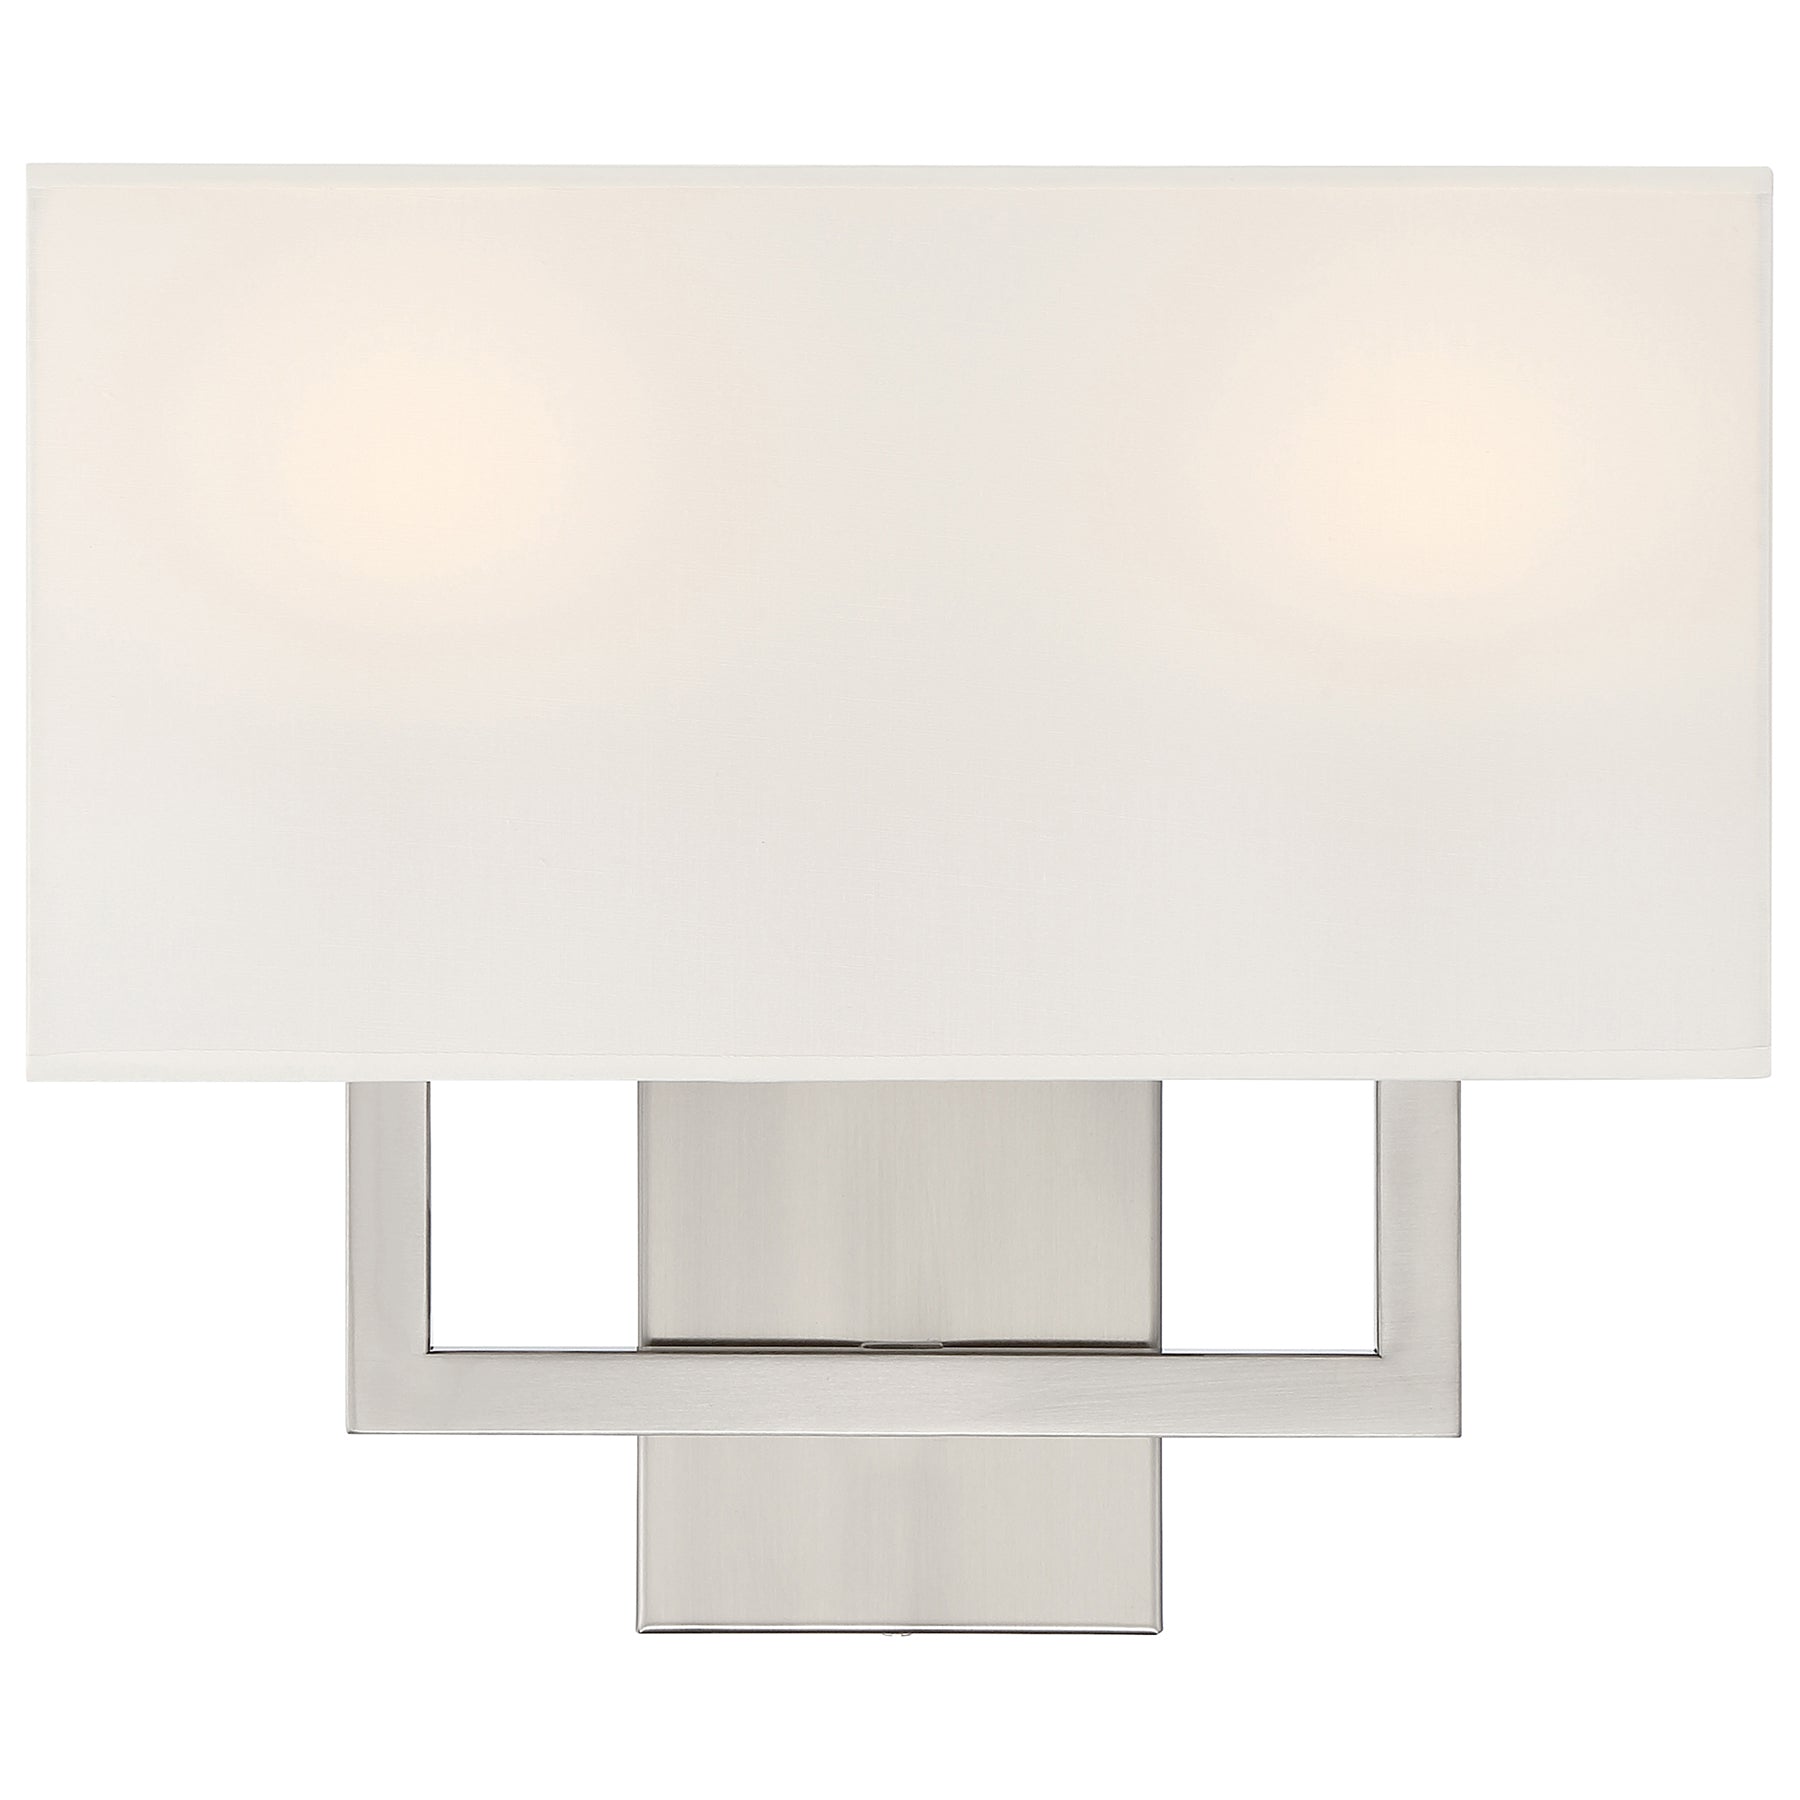 Mid Town 15in. LED Wall Lighting Sconce (Brushed Steel)